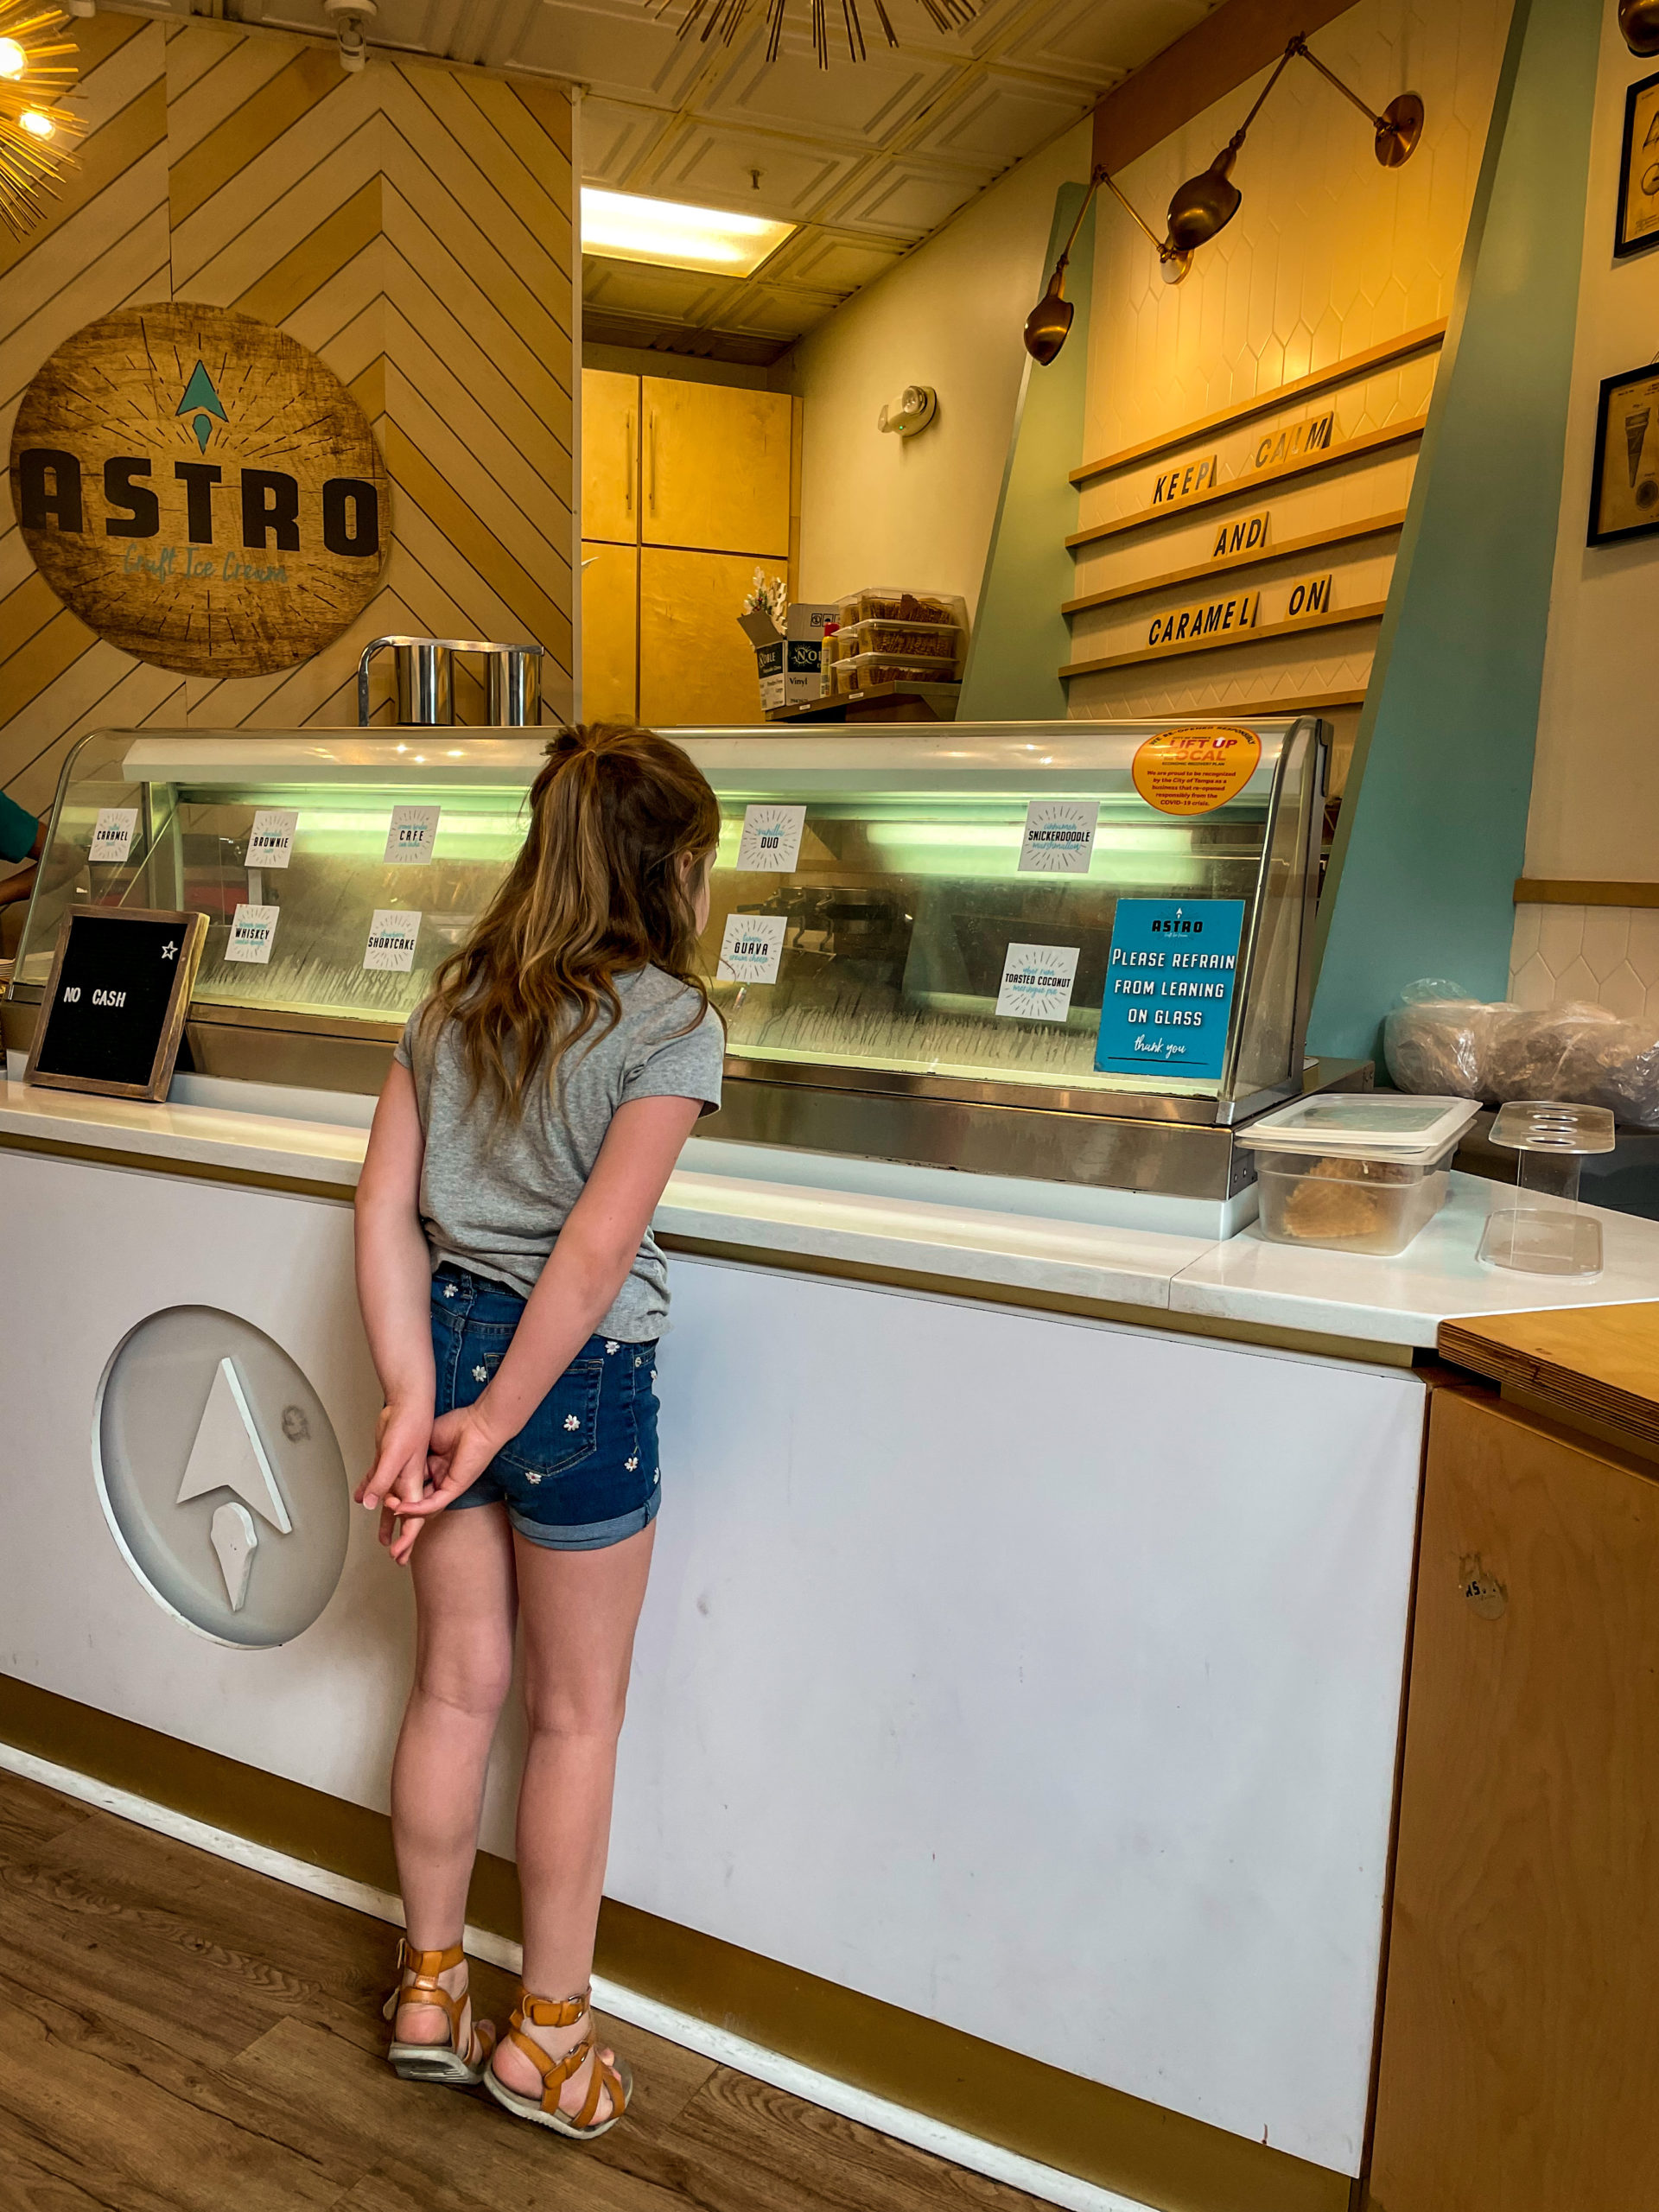 A young girl leans over to look at ice cream flavors at Astro Ice Cream in Armature Works in Tampa Bay.